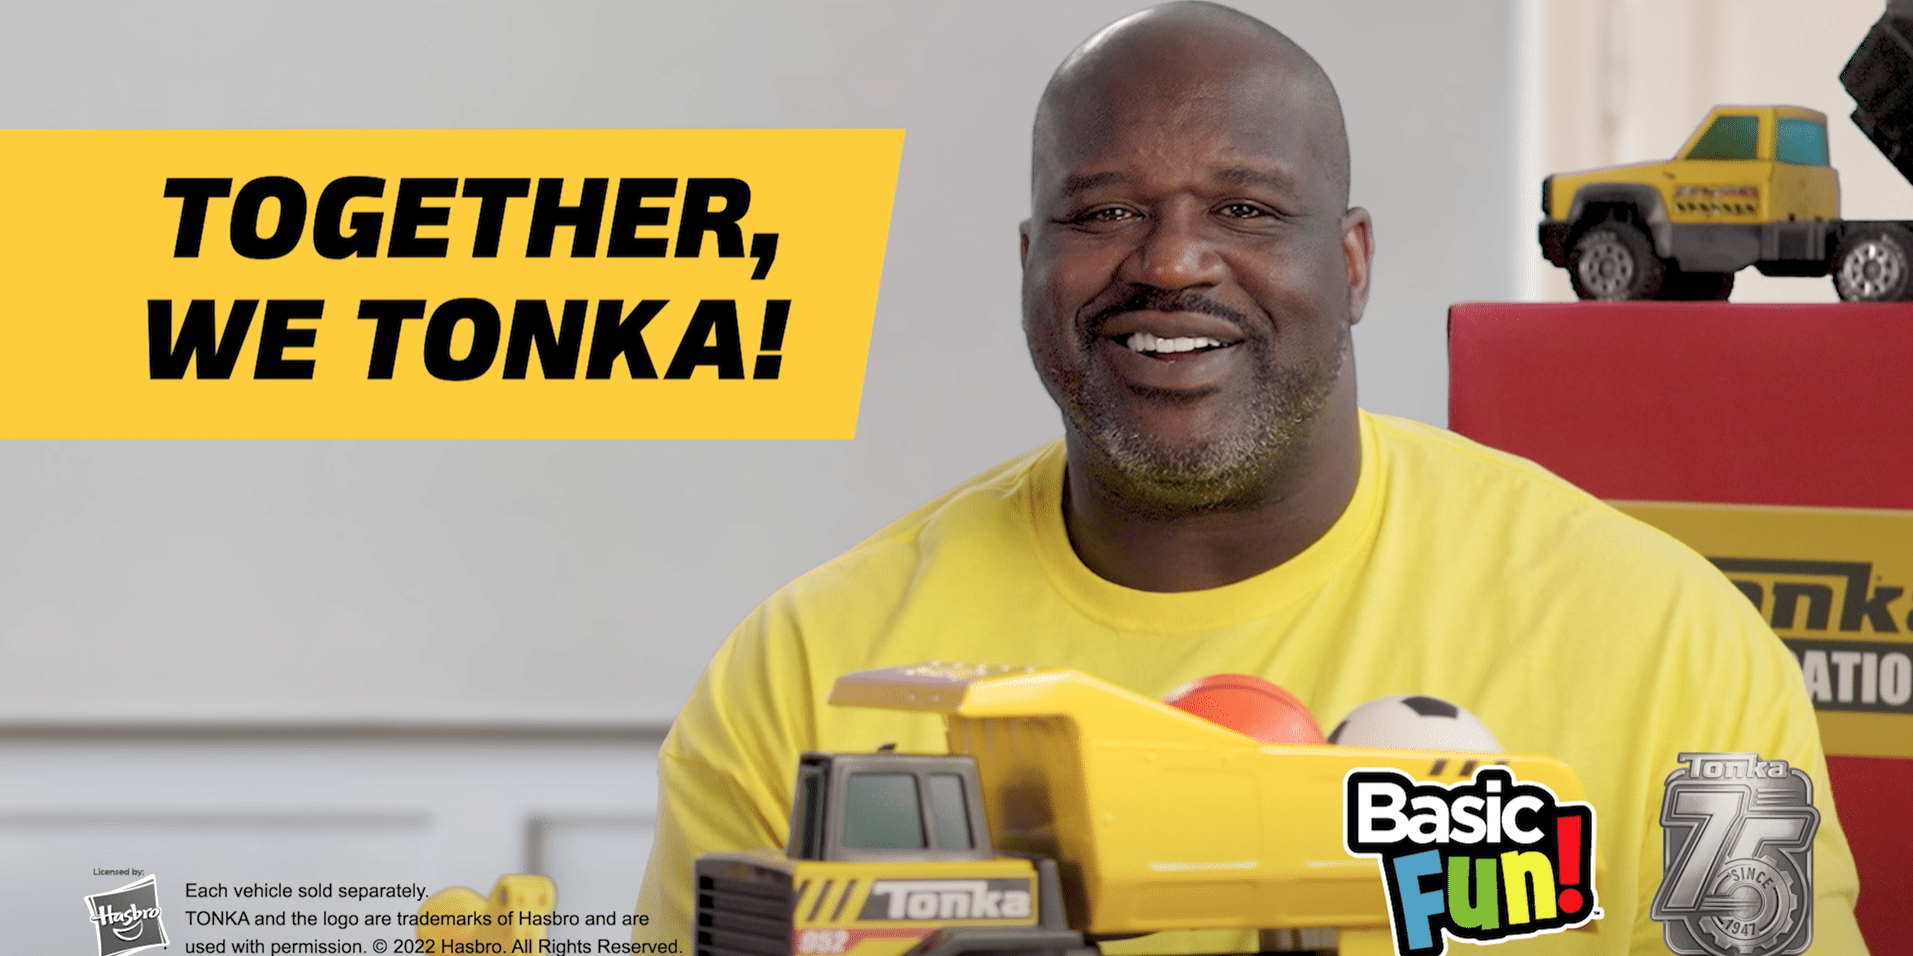 Shaquille O'Neal in the Together We Tonka Commercial